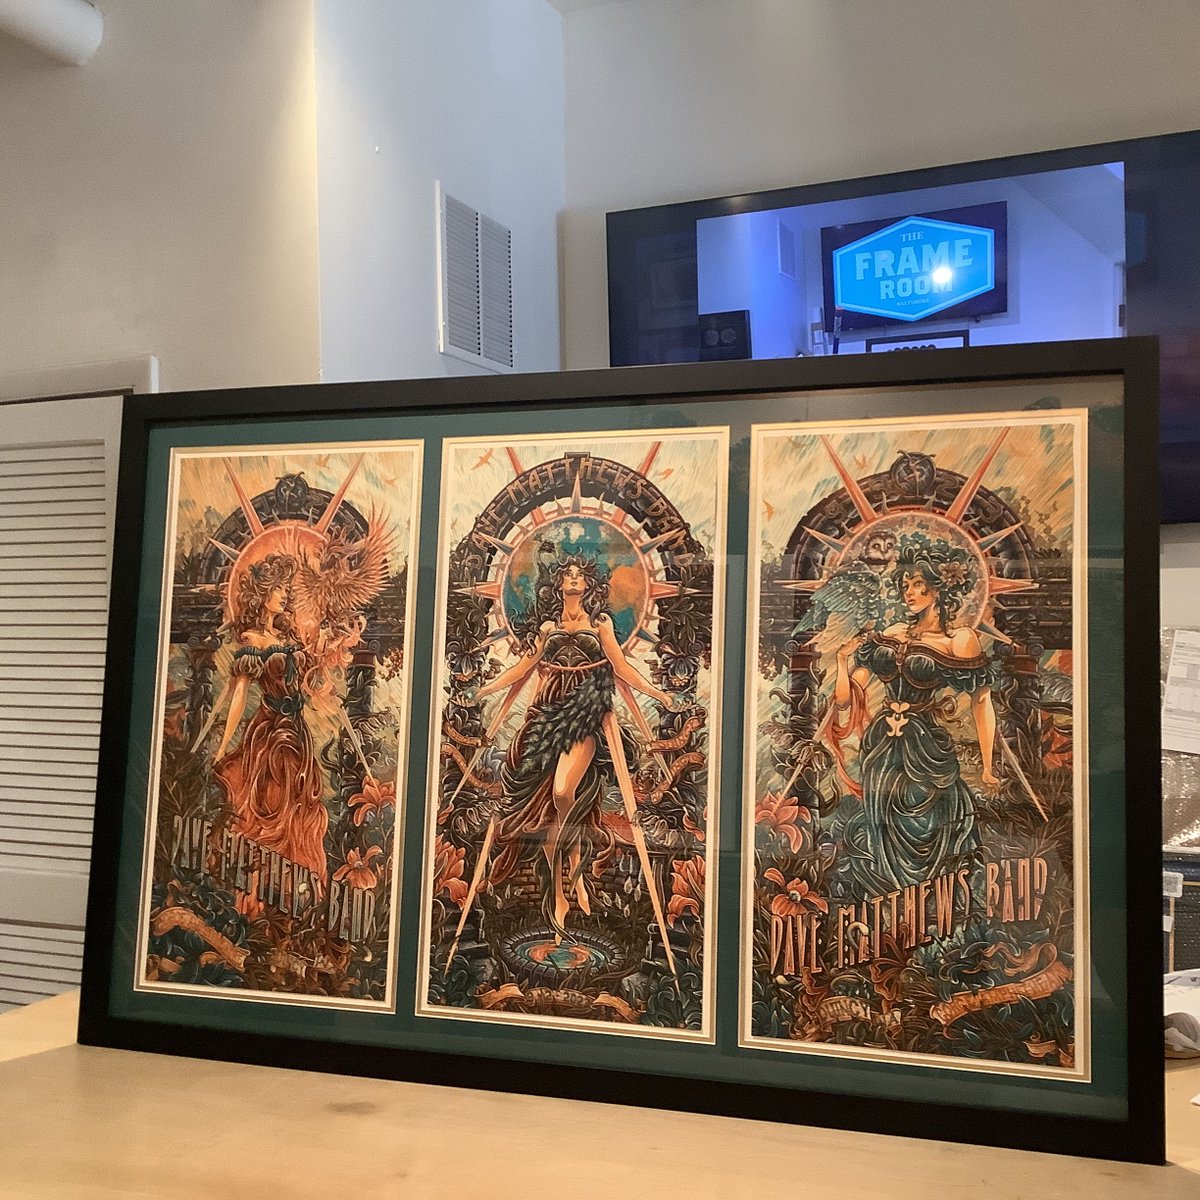 Good thing comes in threes!
#theframeroom #customframes #customframing #customframer #customframeshop #frameshop #fellspoint #baltimore #davematthewsband #concertposter #tryptic